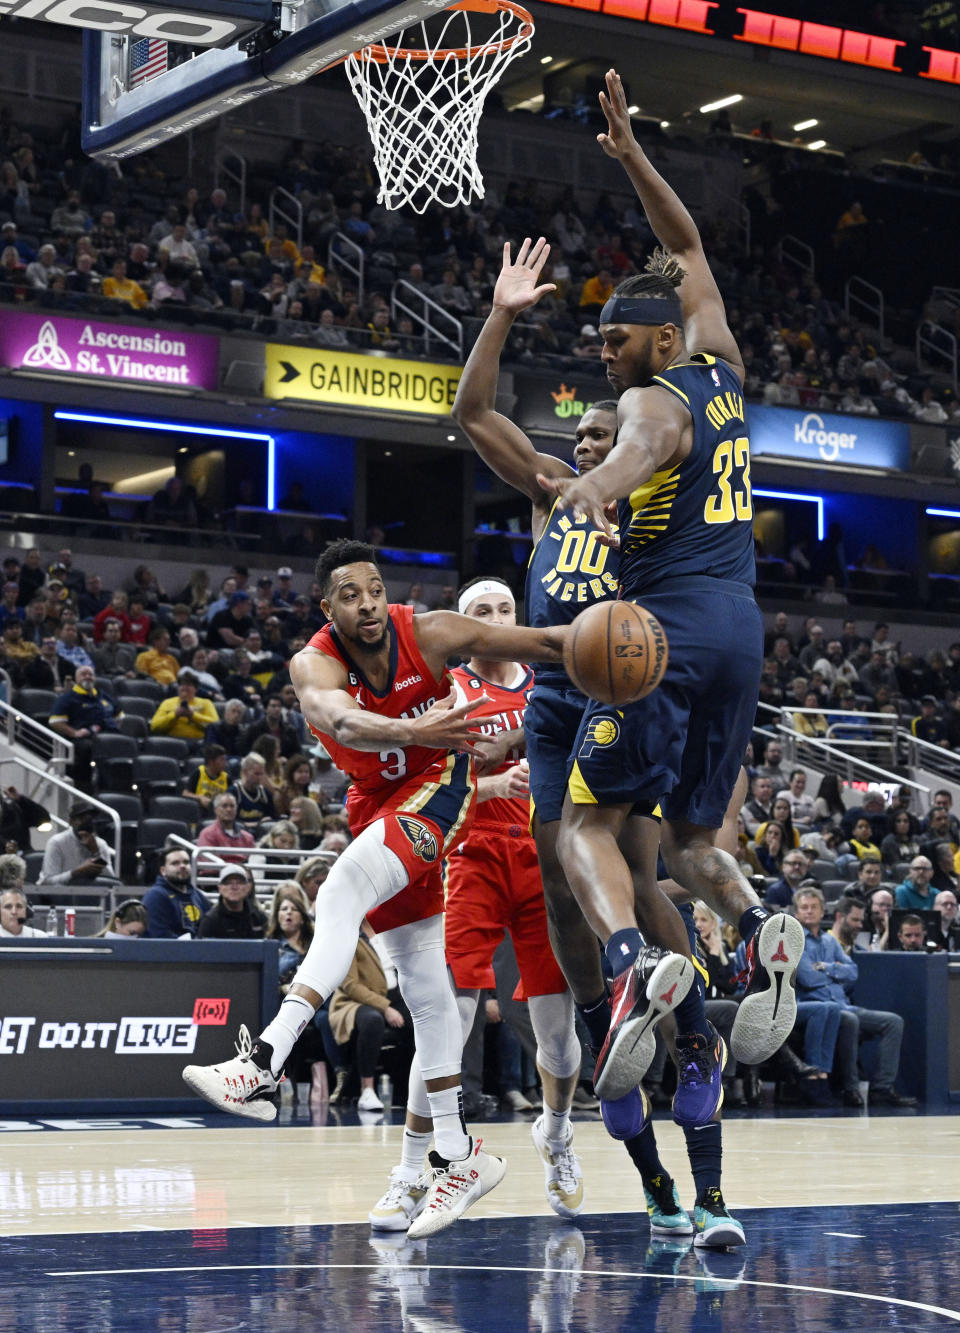 New Orleans Pelicans guard CJ McCollum (3) passes the ball around Indiana Pacers guard Bennedict Mathurin (00) and Indiana Pacers center Myles Turner (33) during the second quarter of an NBA Basketball game, Monday, Nov. 7, 2022, in Indianapolis, Ind. (AP Photo/Marc Lebryk)